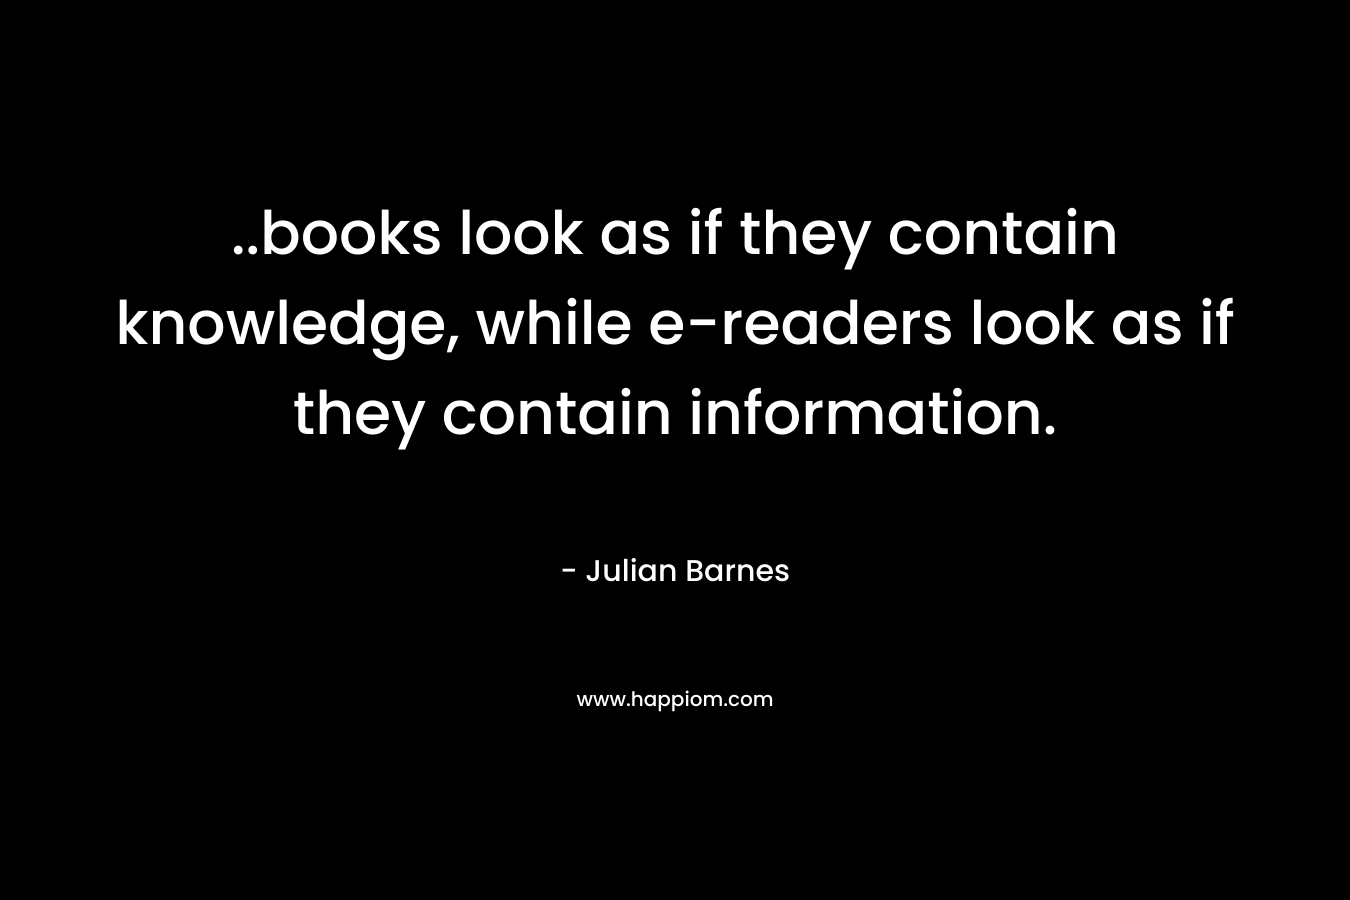 ..books look as if they contain knowledge, while e-readers look as if they contain information.